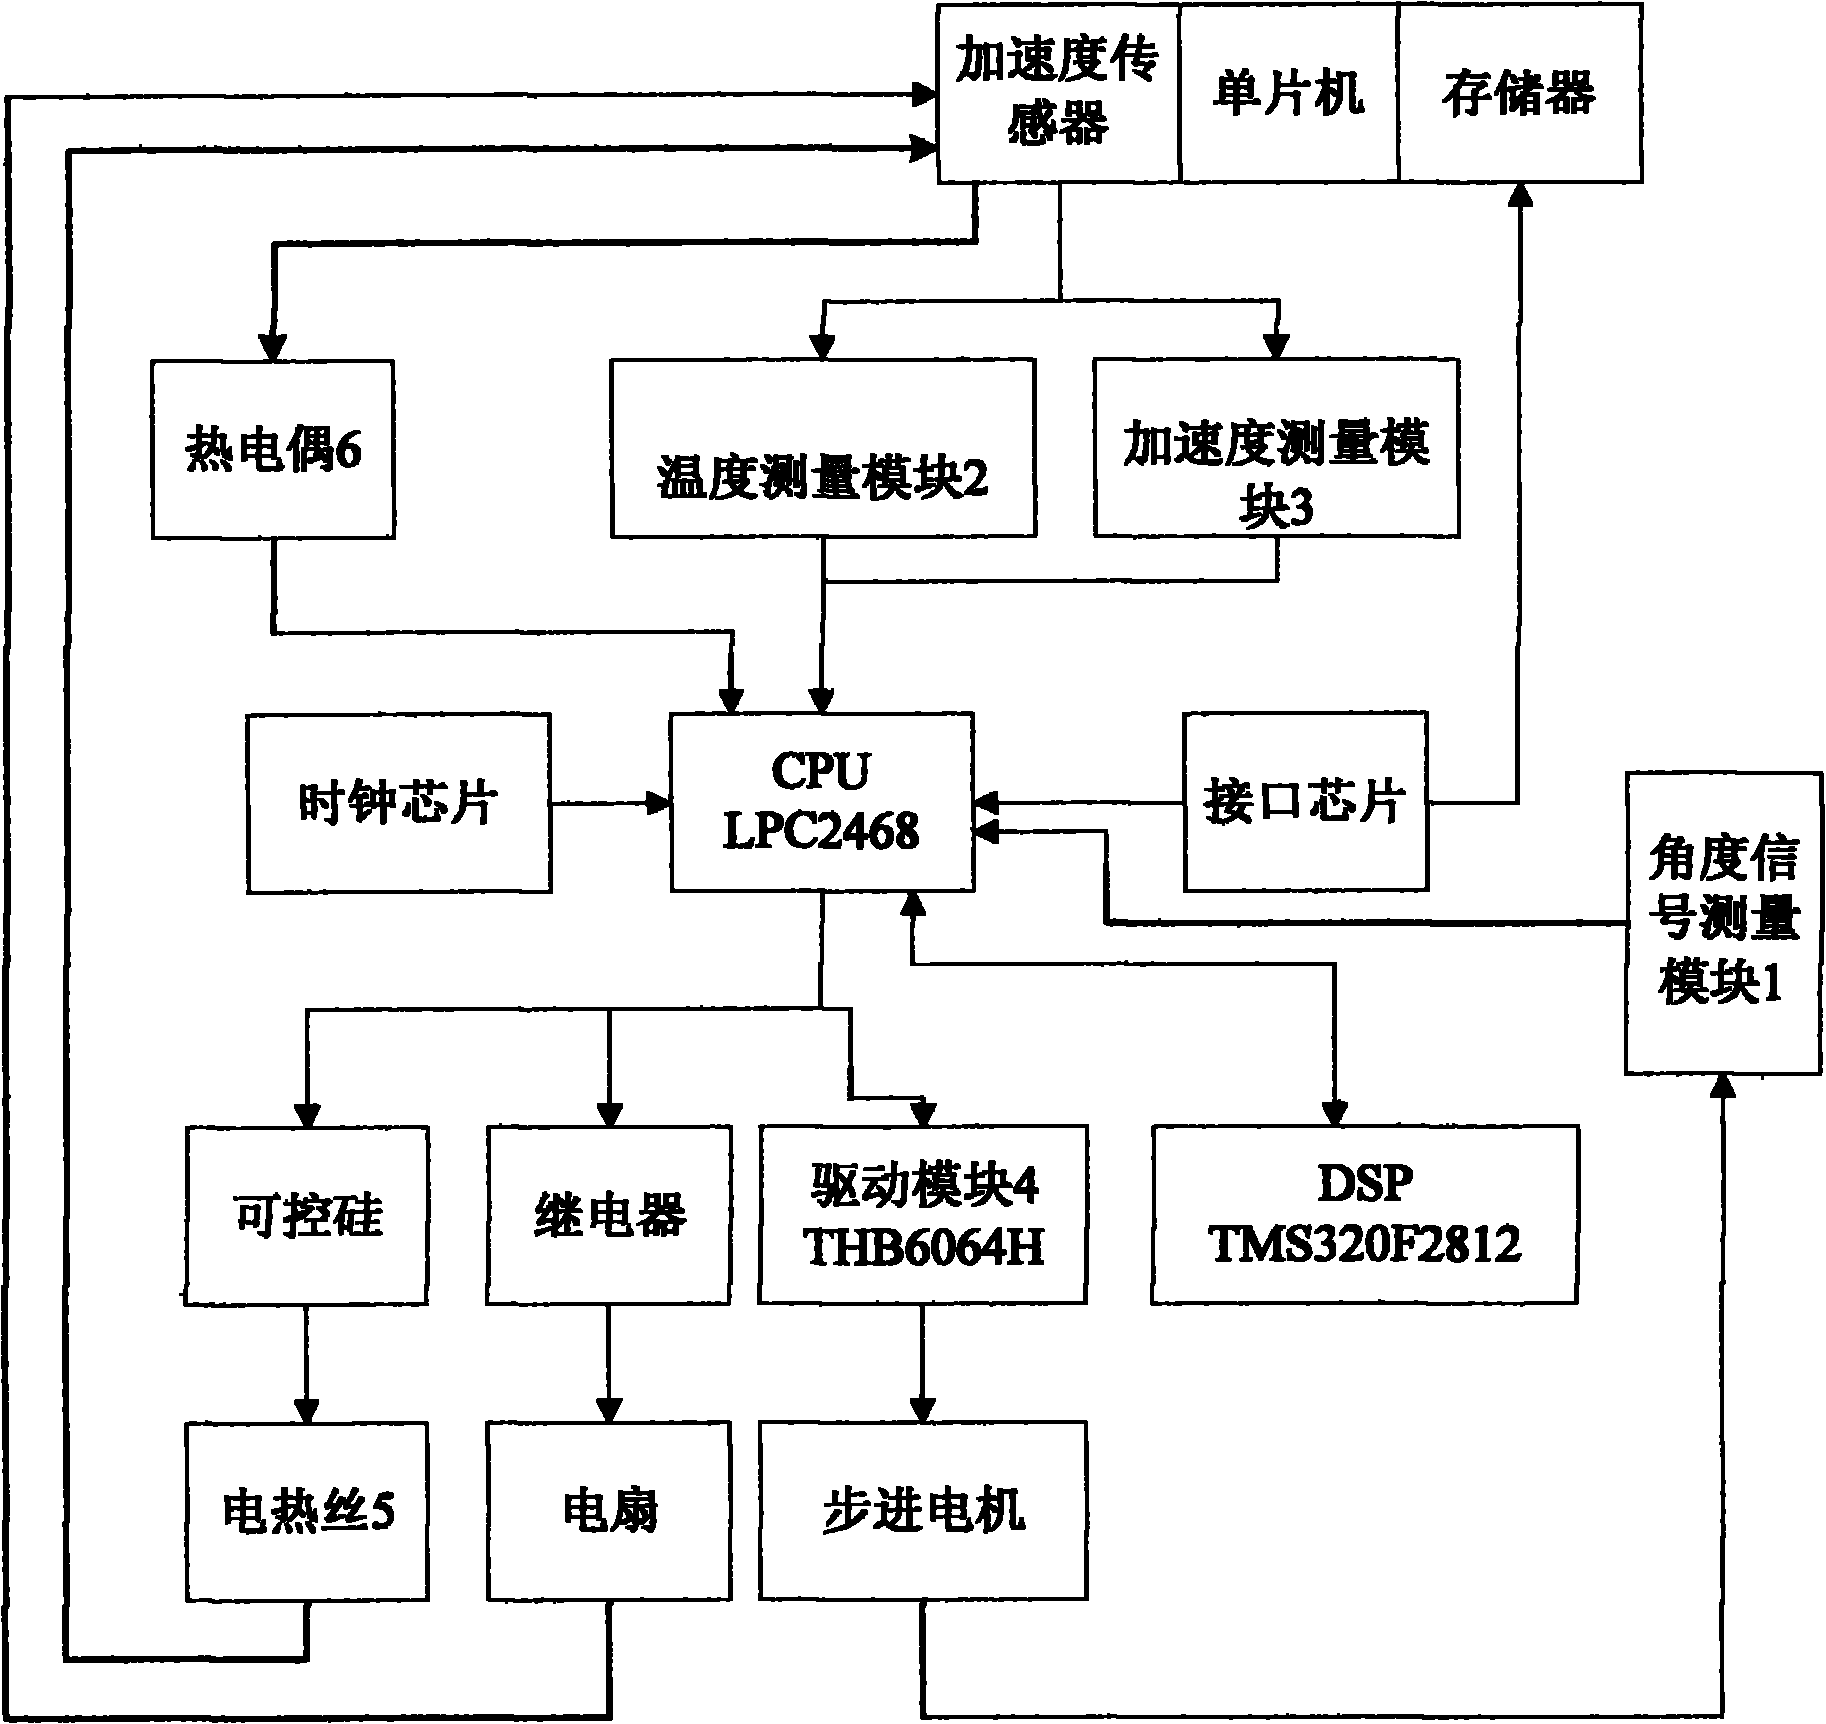 Full-automatic correction system for acceleration sensor